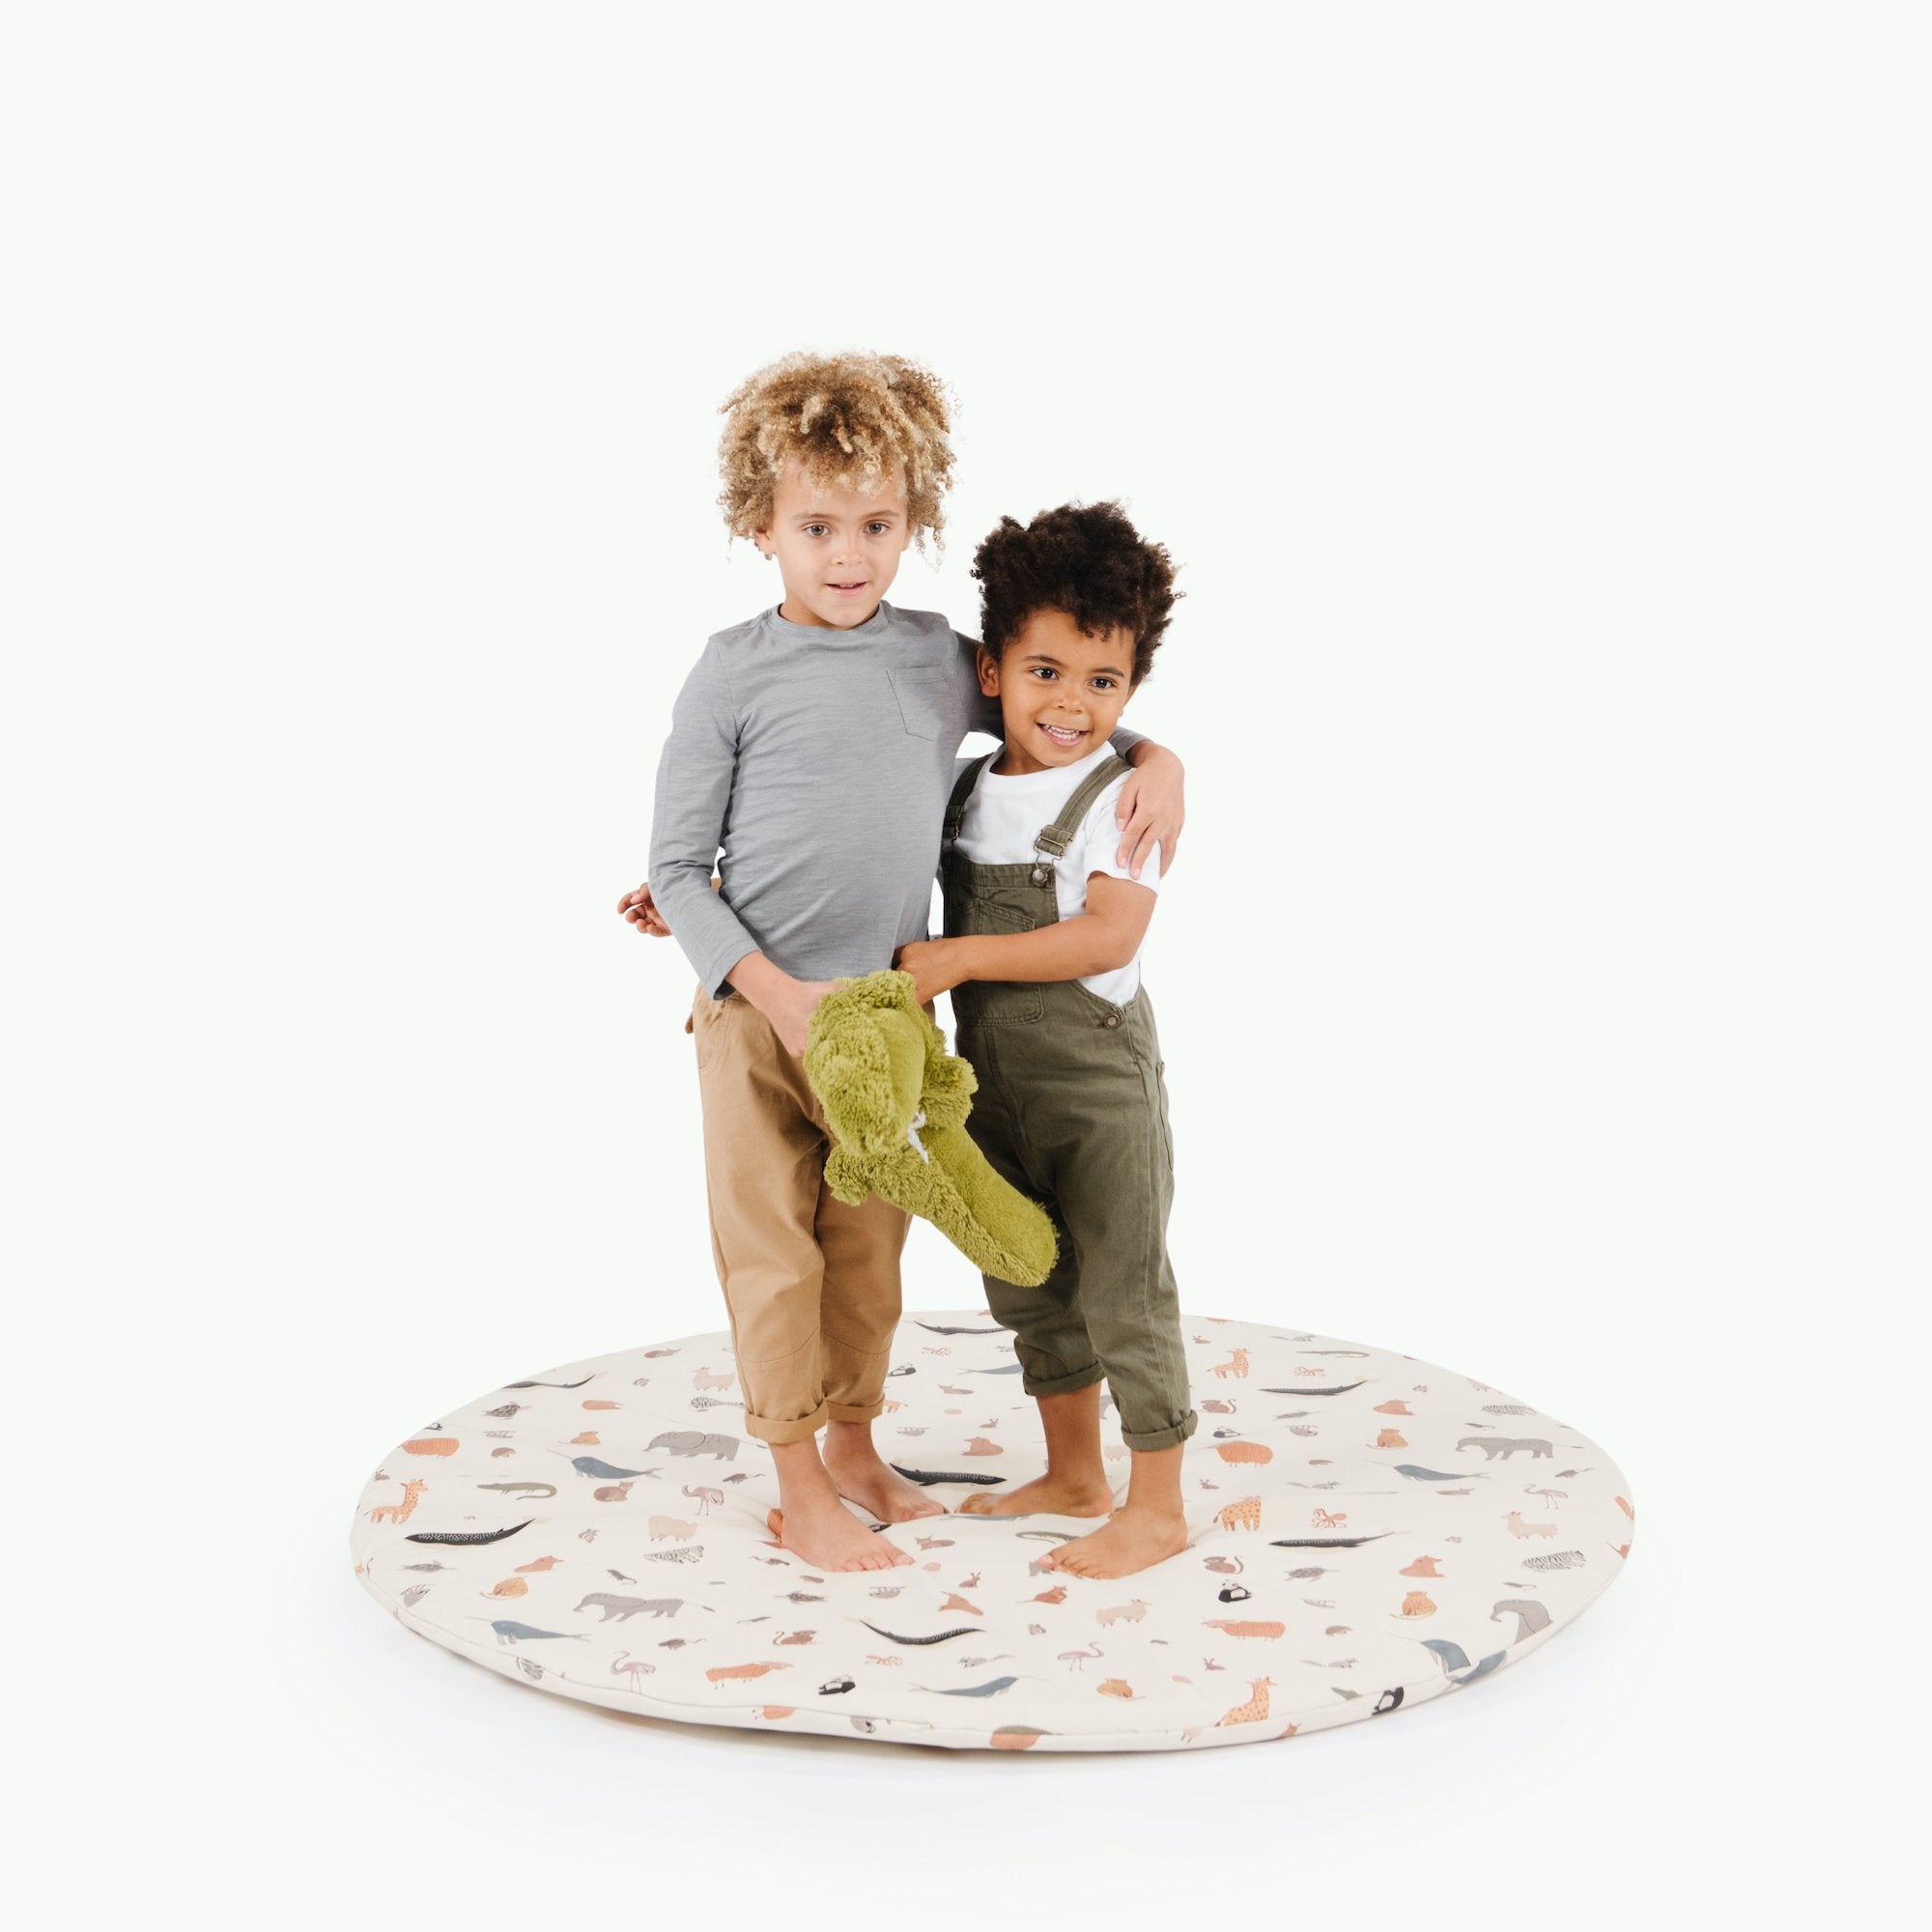 Menagerie@kids standing on Menagerie Padded Midi Circle